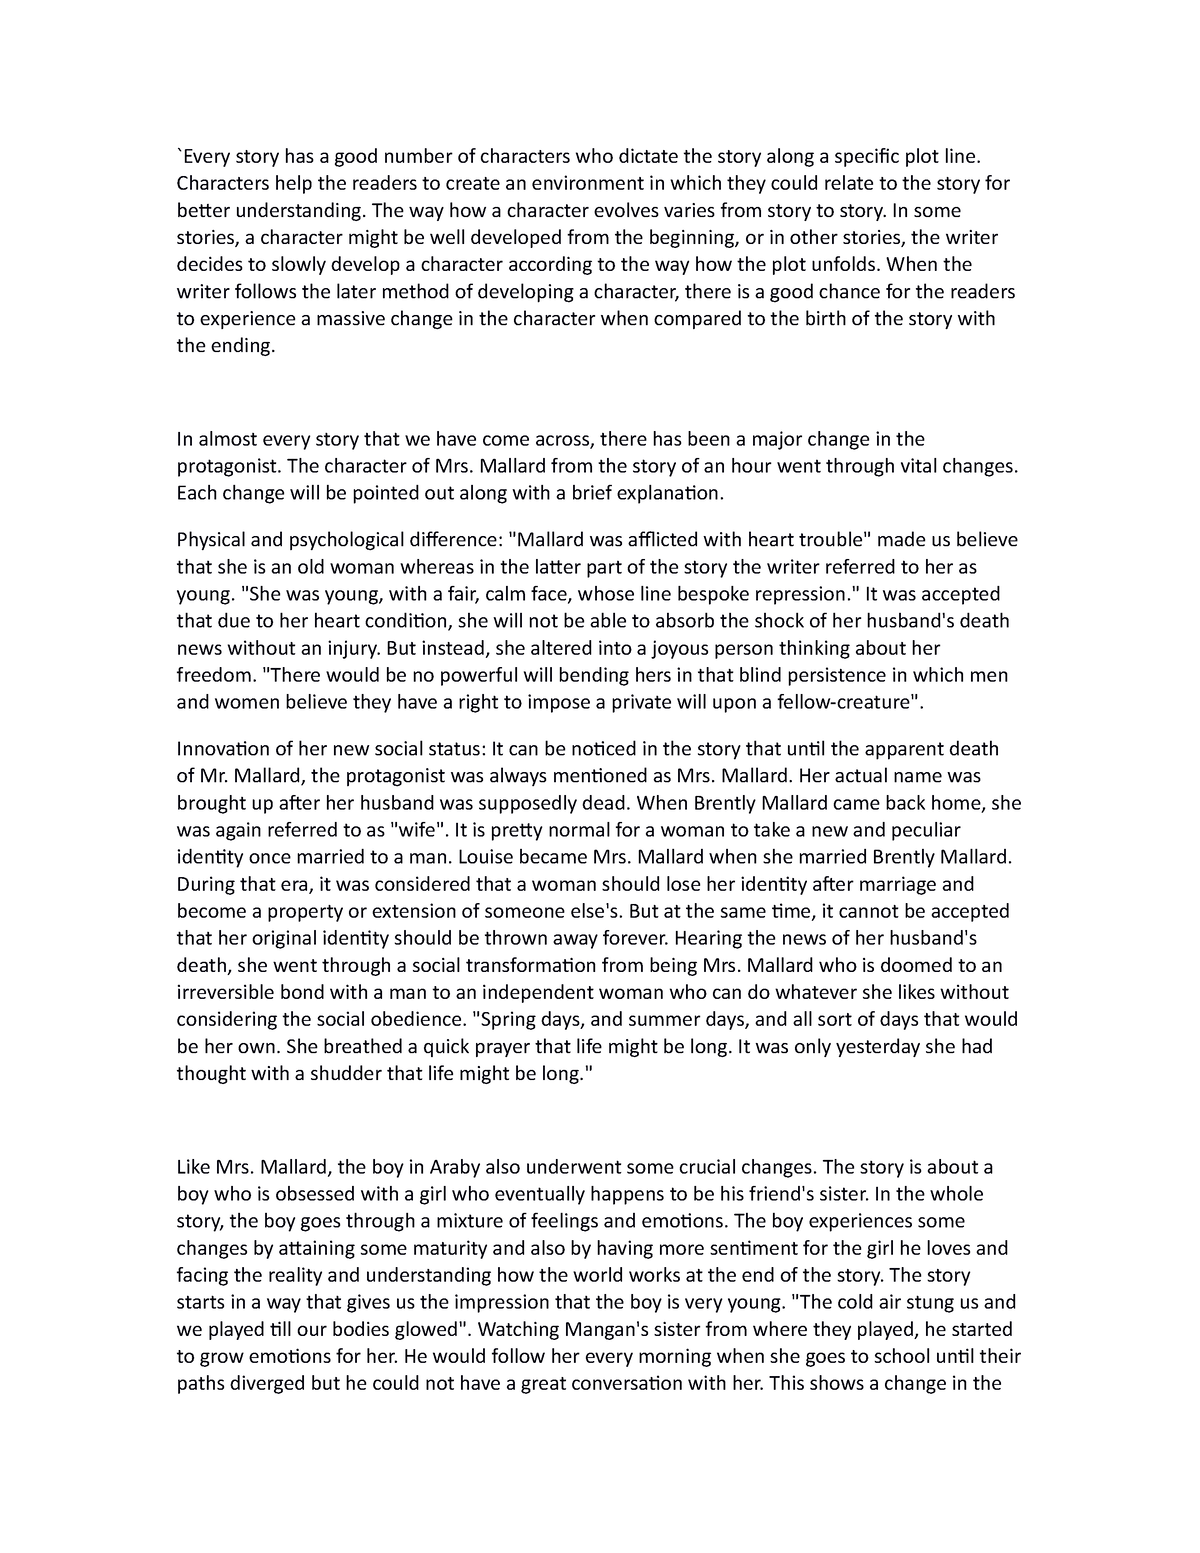 Essay 1 - bjhk - `Every story has a good number of characters who ...